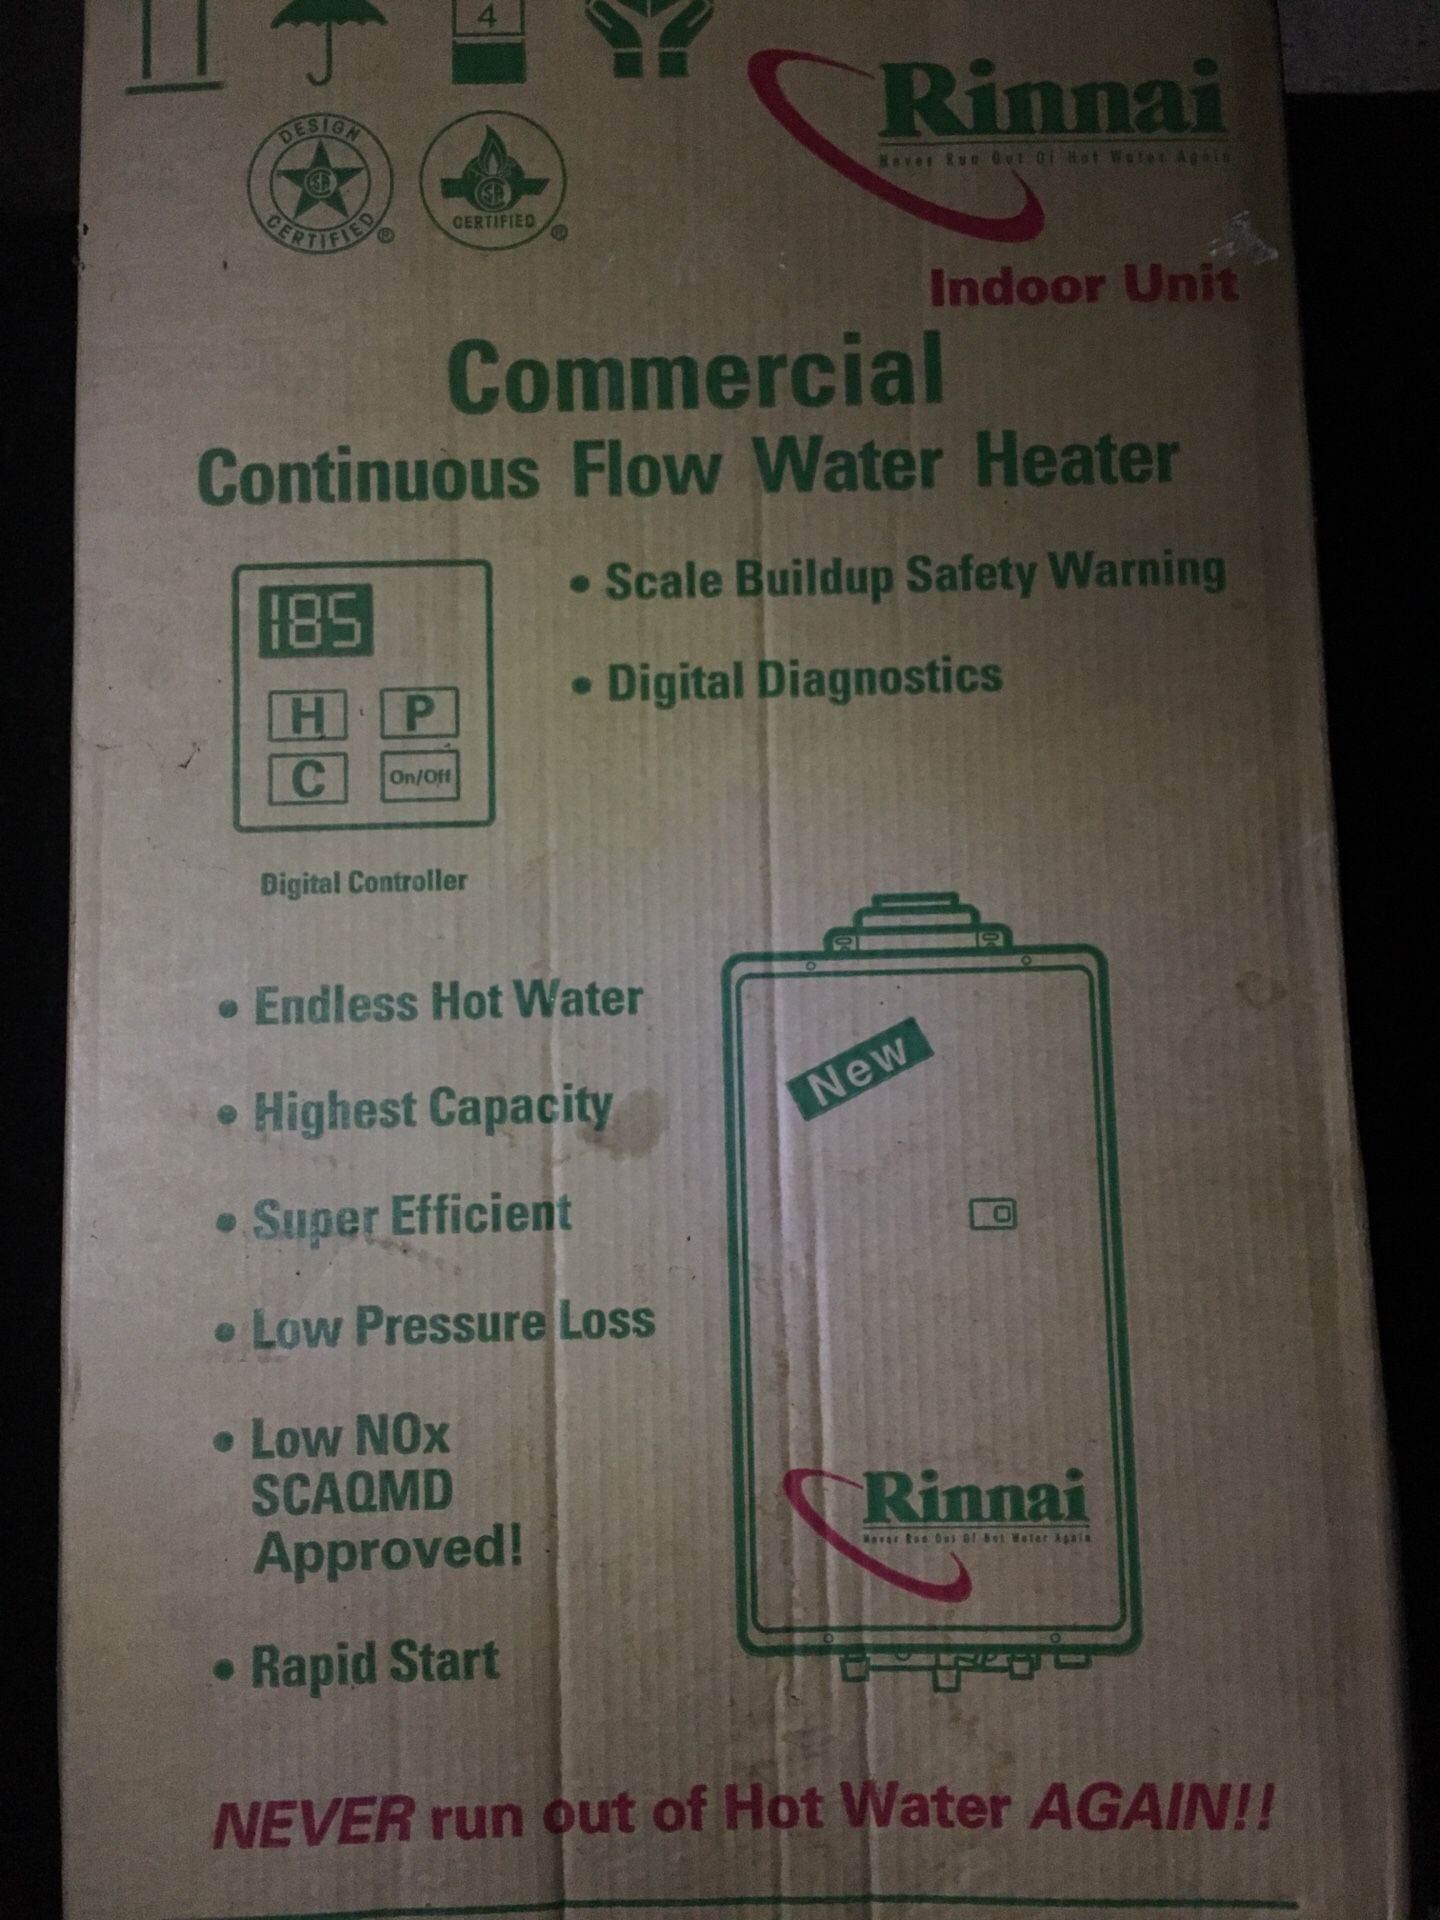 Commercial Rinnai Continuous flow water heater